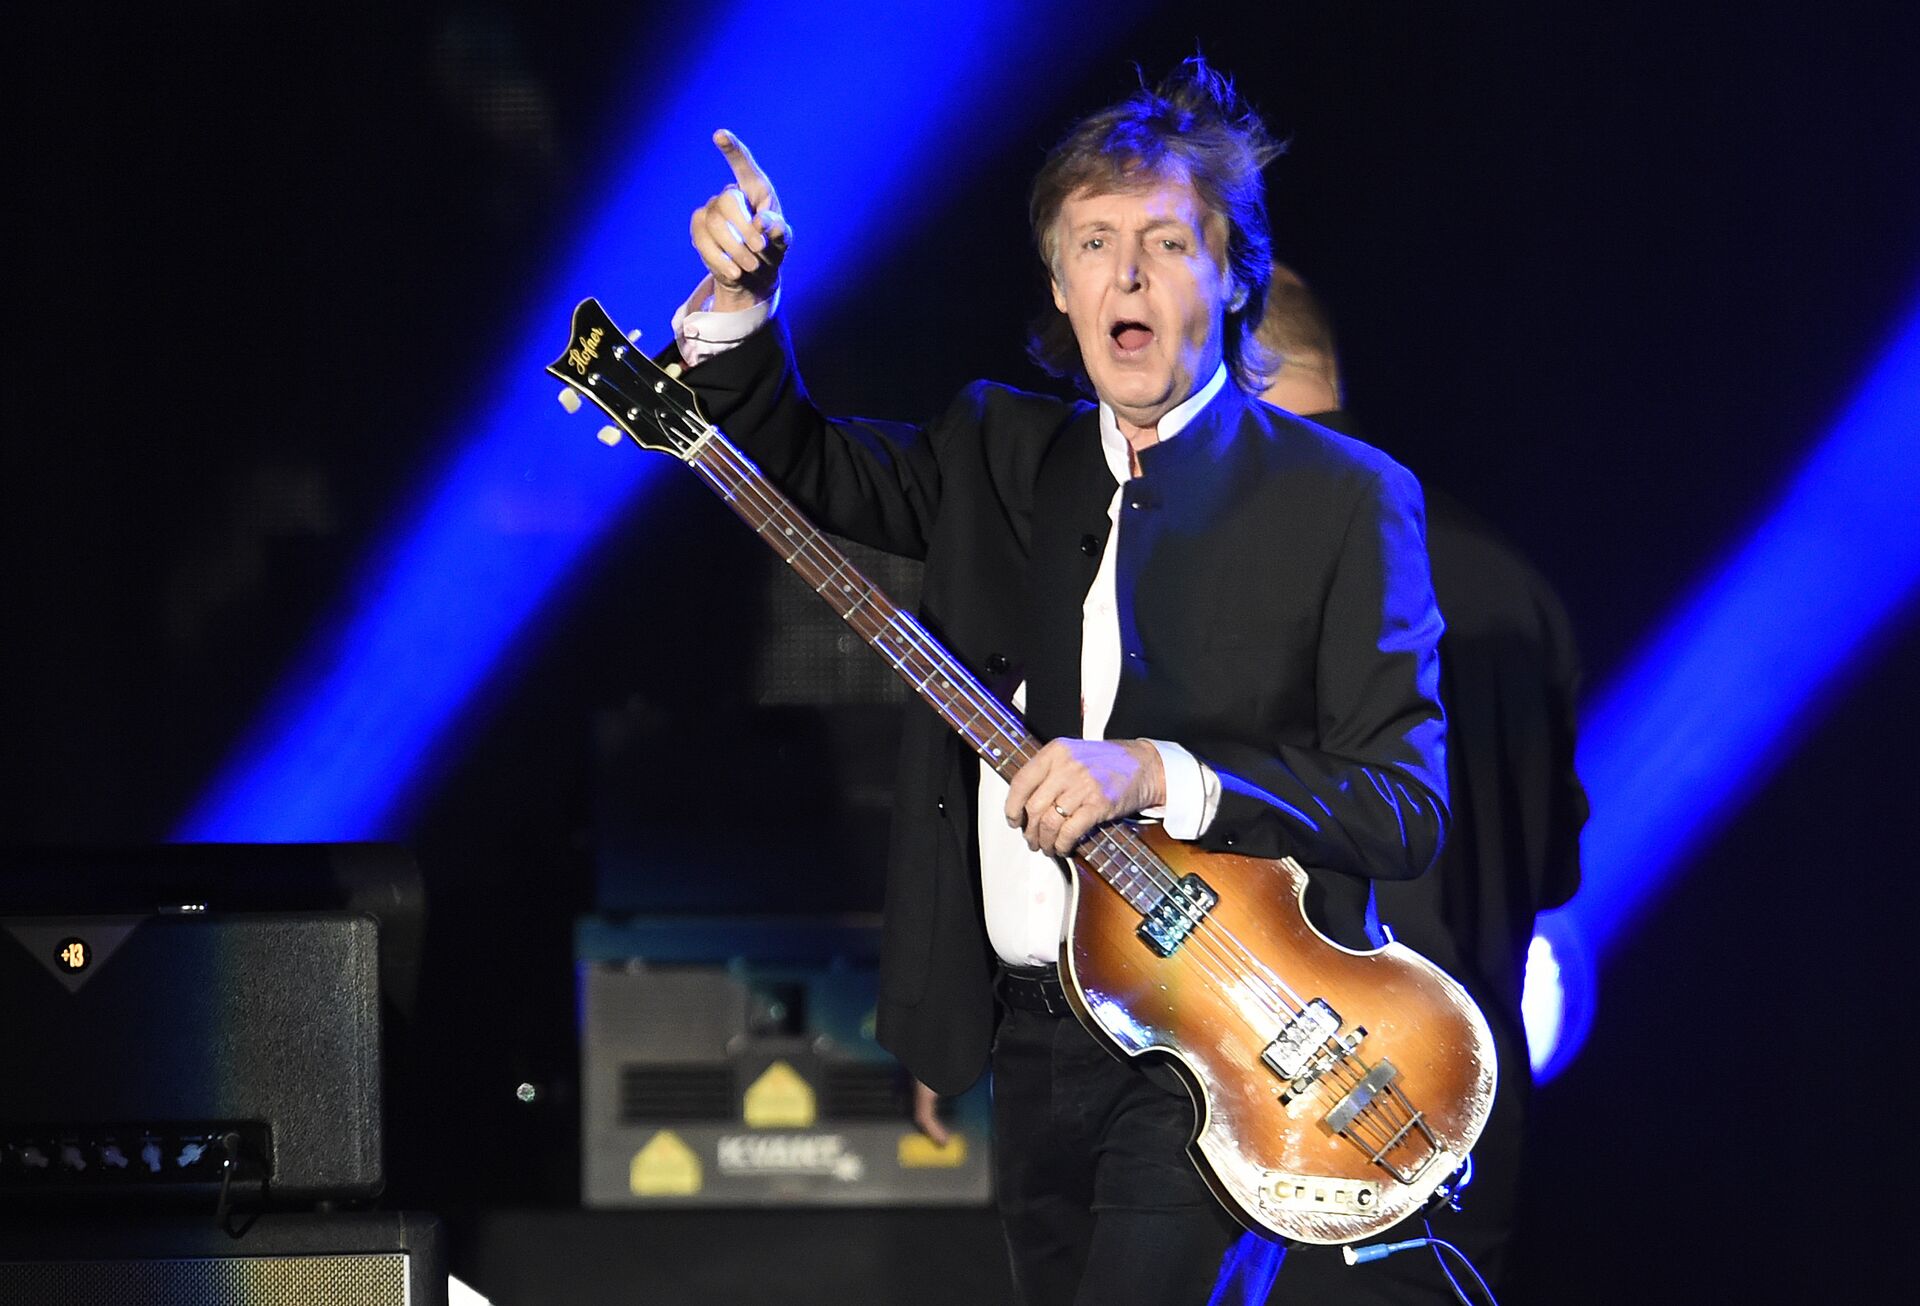 Paul McCartney greets the crowd as he arrives onstage for his performance on day 2 of the 2016 Desert Trip music festival at Empire Polo Field on Saturday, Oct. 8, 2016, in Indio, Calif - Sputnik International, 1920, 11.10.2021